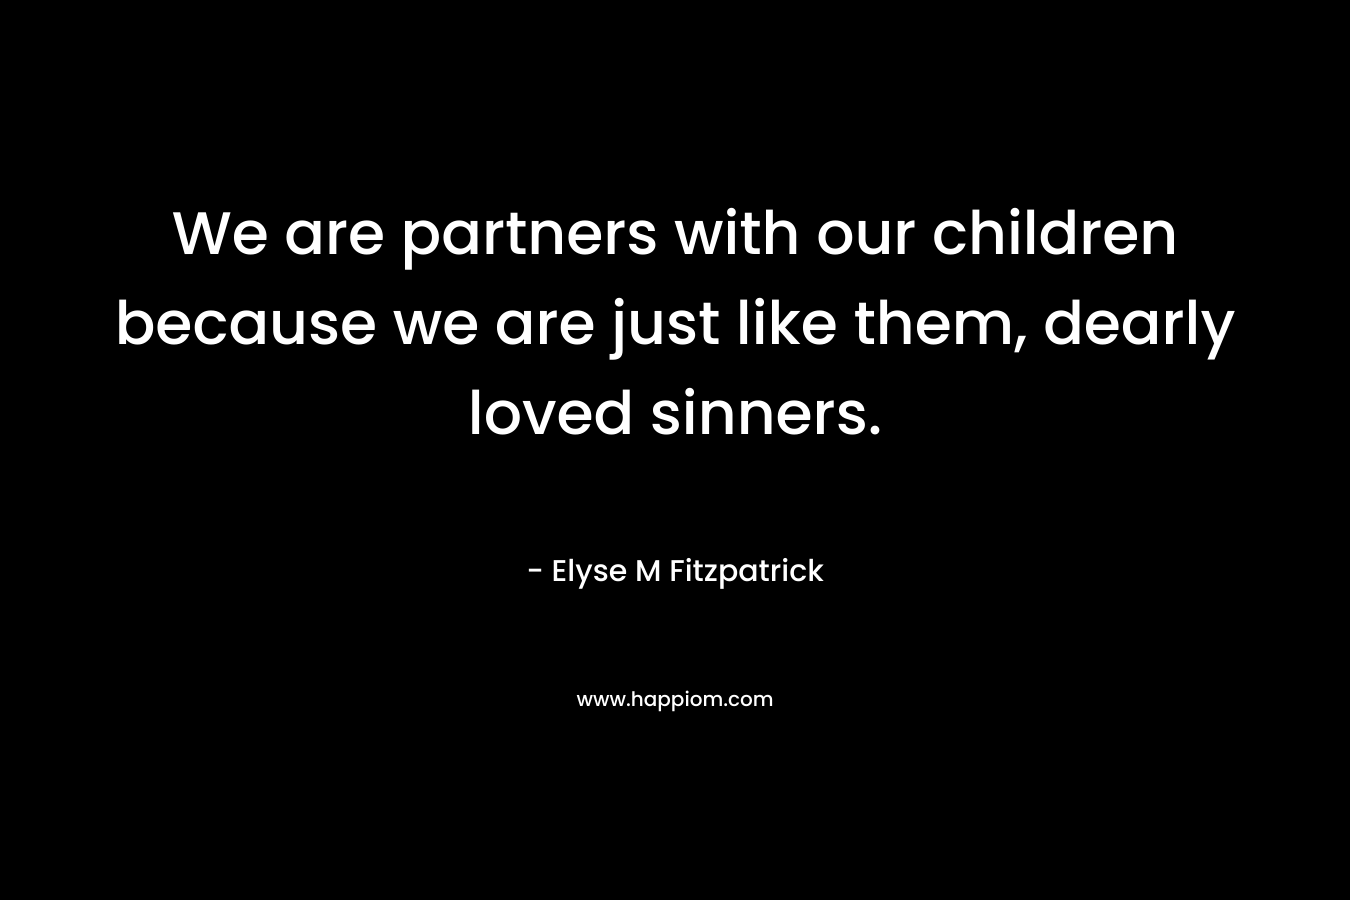 We are partners with our children because we are just like them, dearly loved sinners. – Elyse M Fitzpatrick